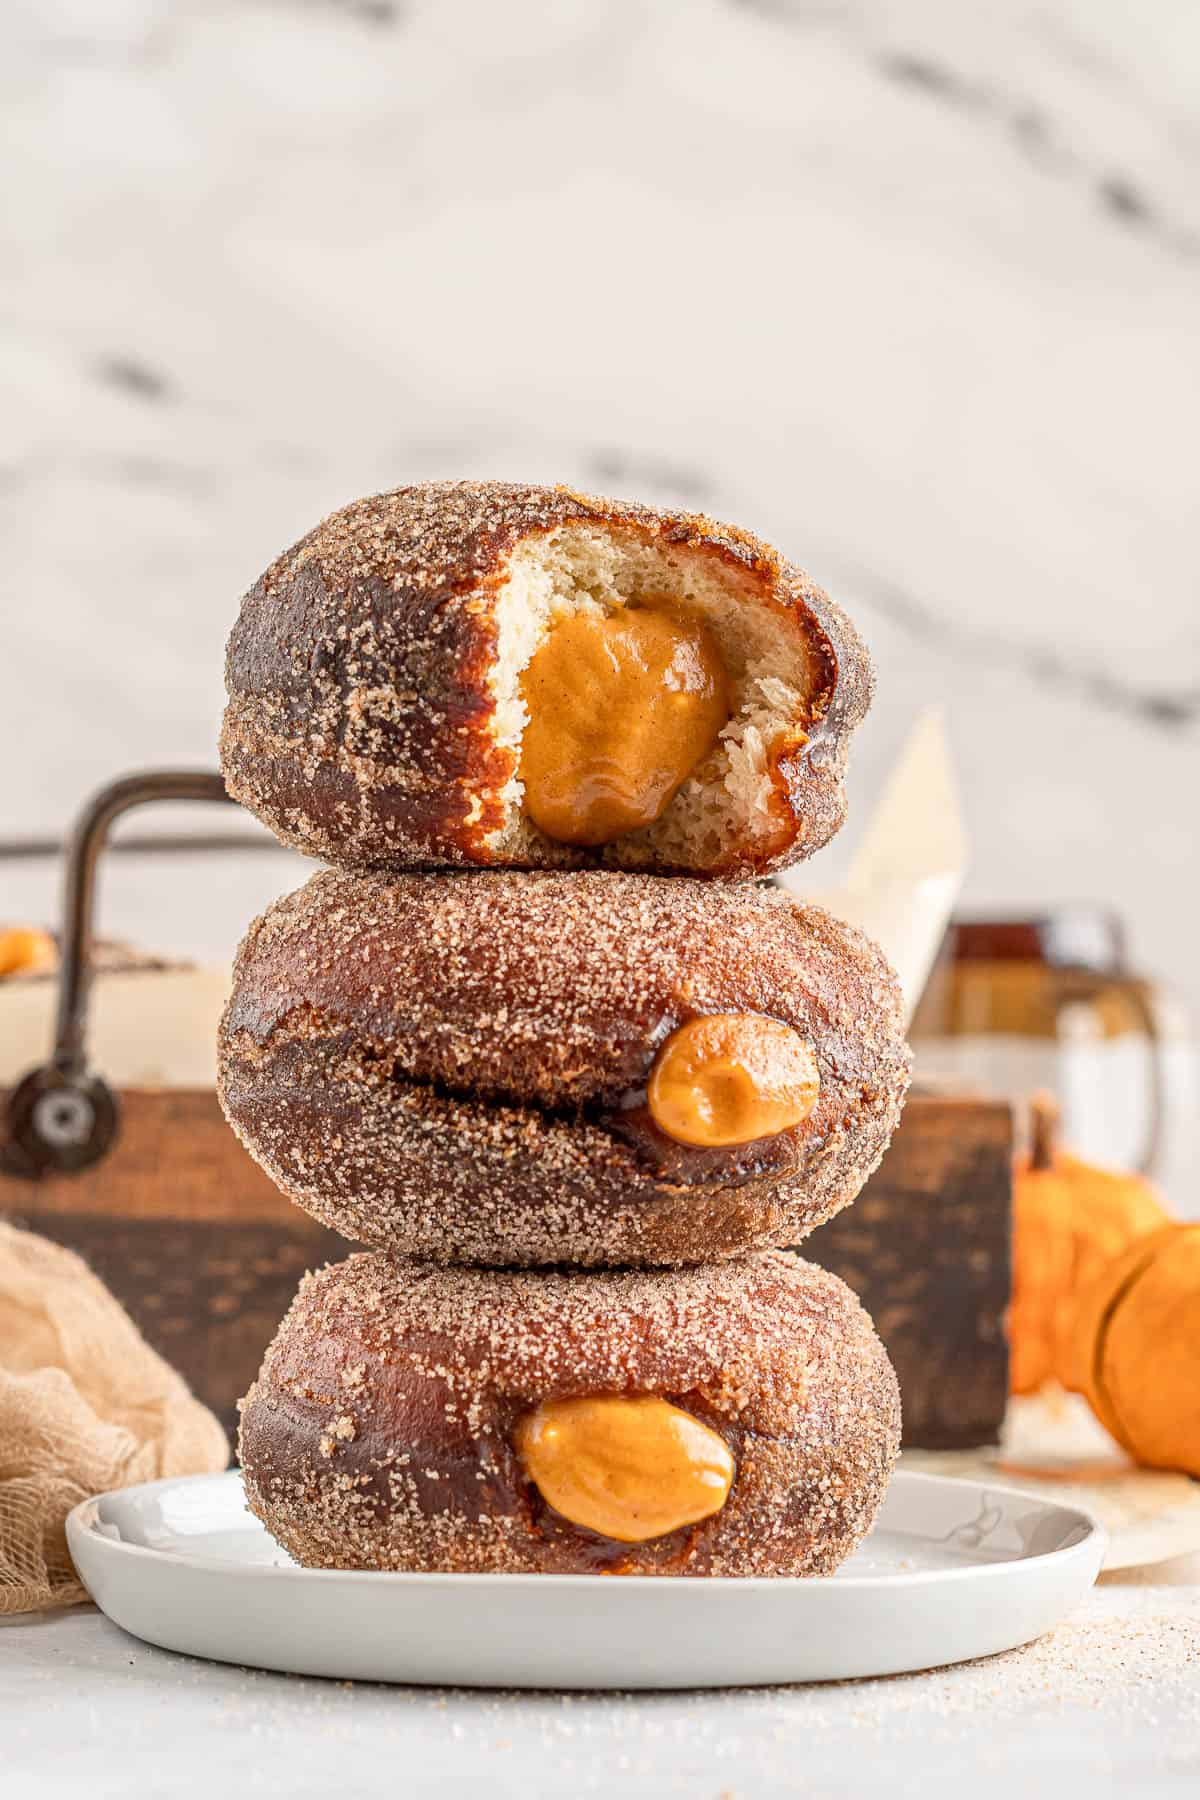 Three pumpkin filled donuts stacked on top of each other with a bite taken out of the top one.